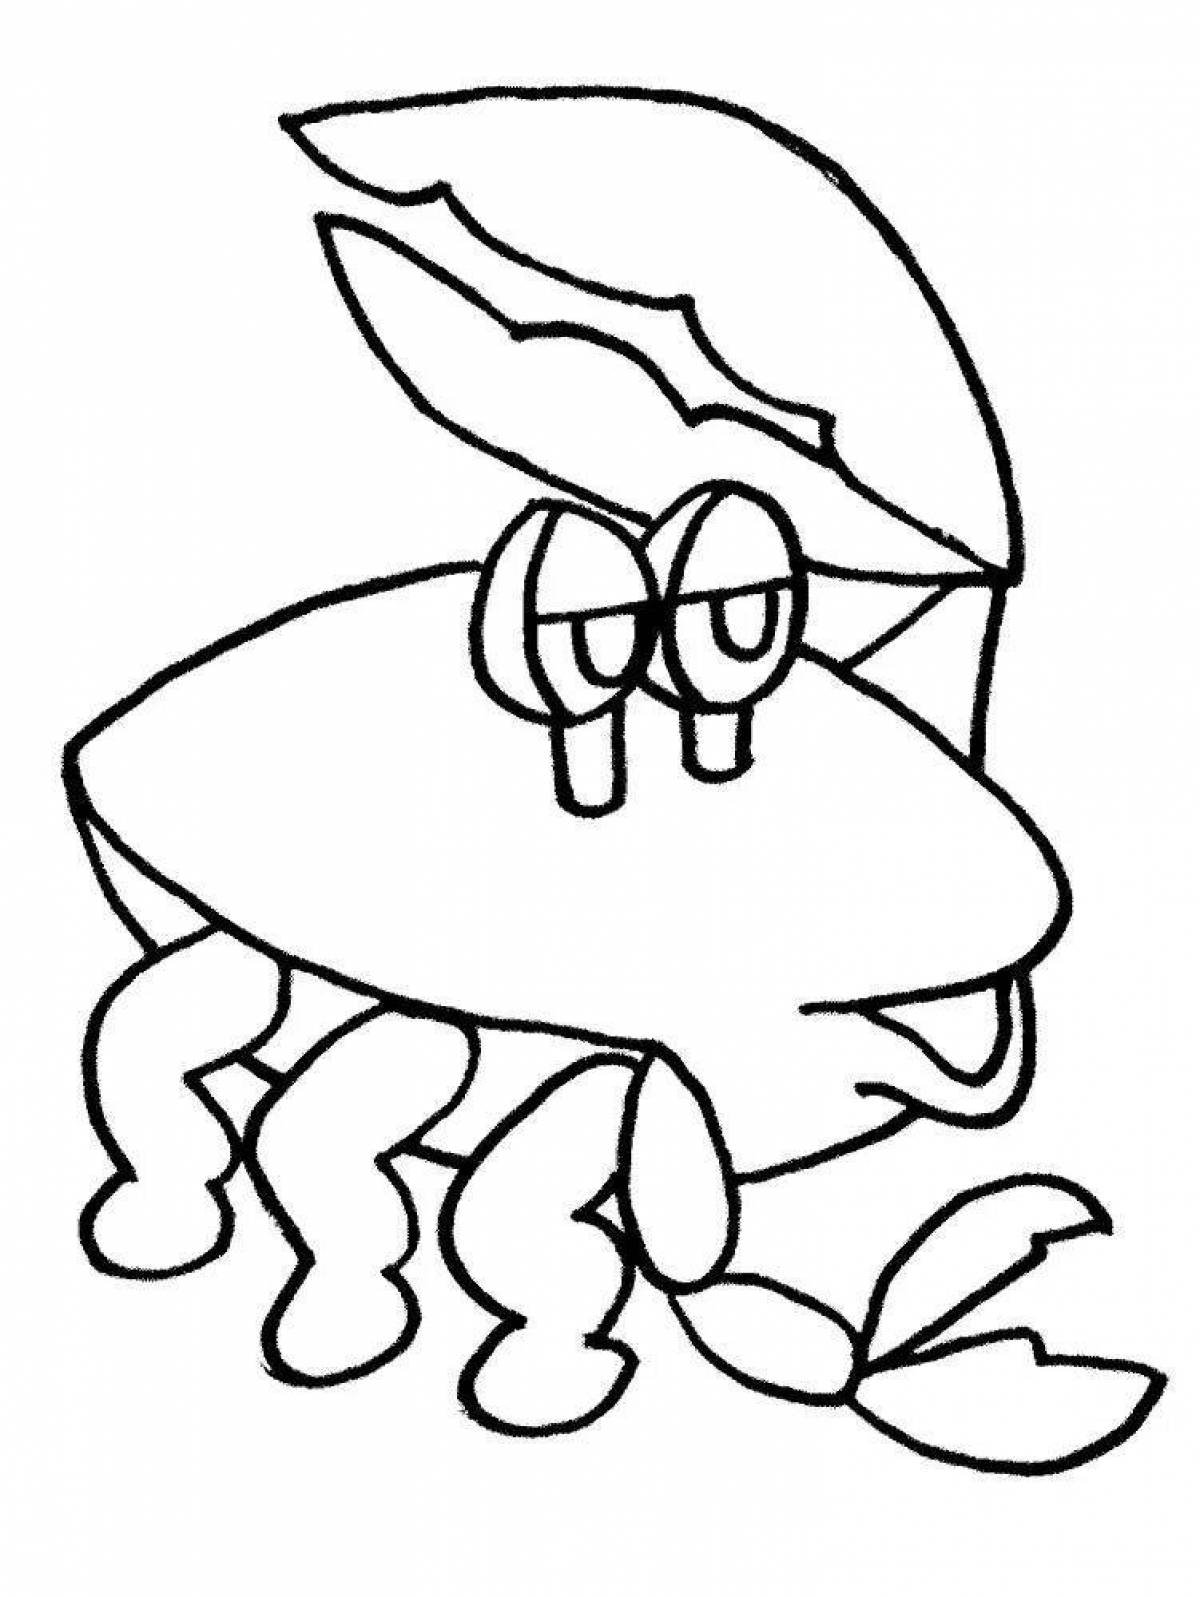 Charming crab coloring page